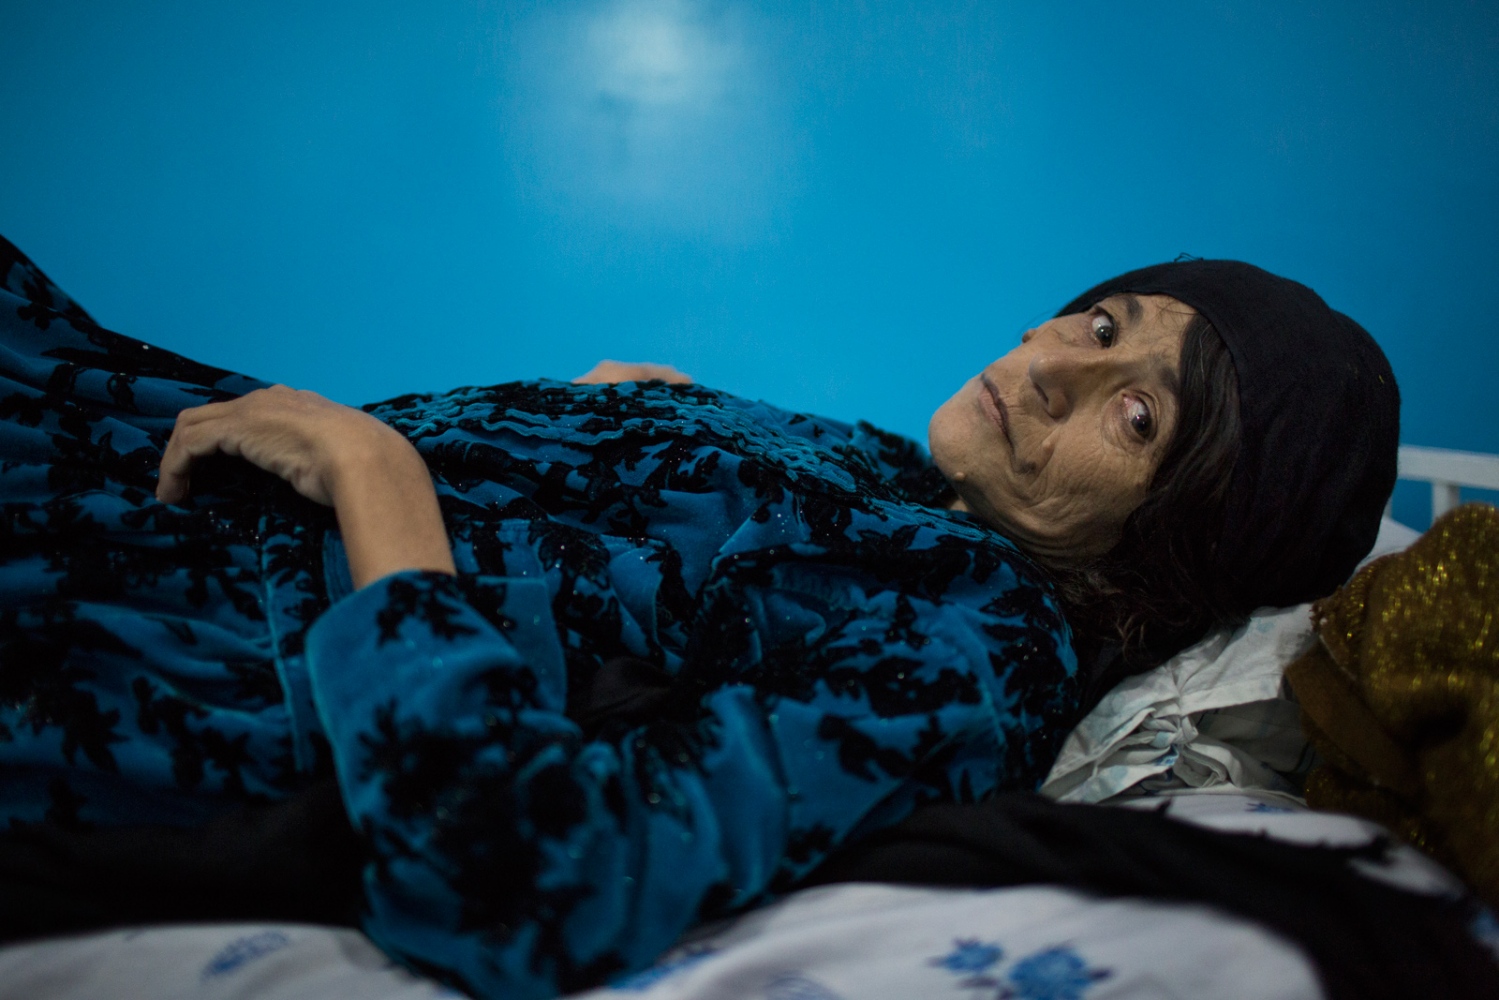  Jummaghul rests in one of the private rooms at the hospital. In the past, Jammaghul was often beaten by her husband, especially on her head, which her sister believes led to health problems. Jammaghul divorced her husband about 10 years ago, but she rarely sees any of her 5 children, which causes her great distress. She now lives with her brother, who brought her to the hospital. Mazar e Sharif, Afghanistan. December 2015. 